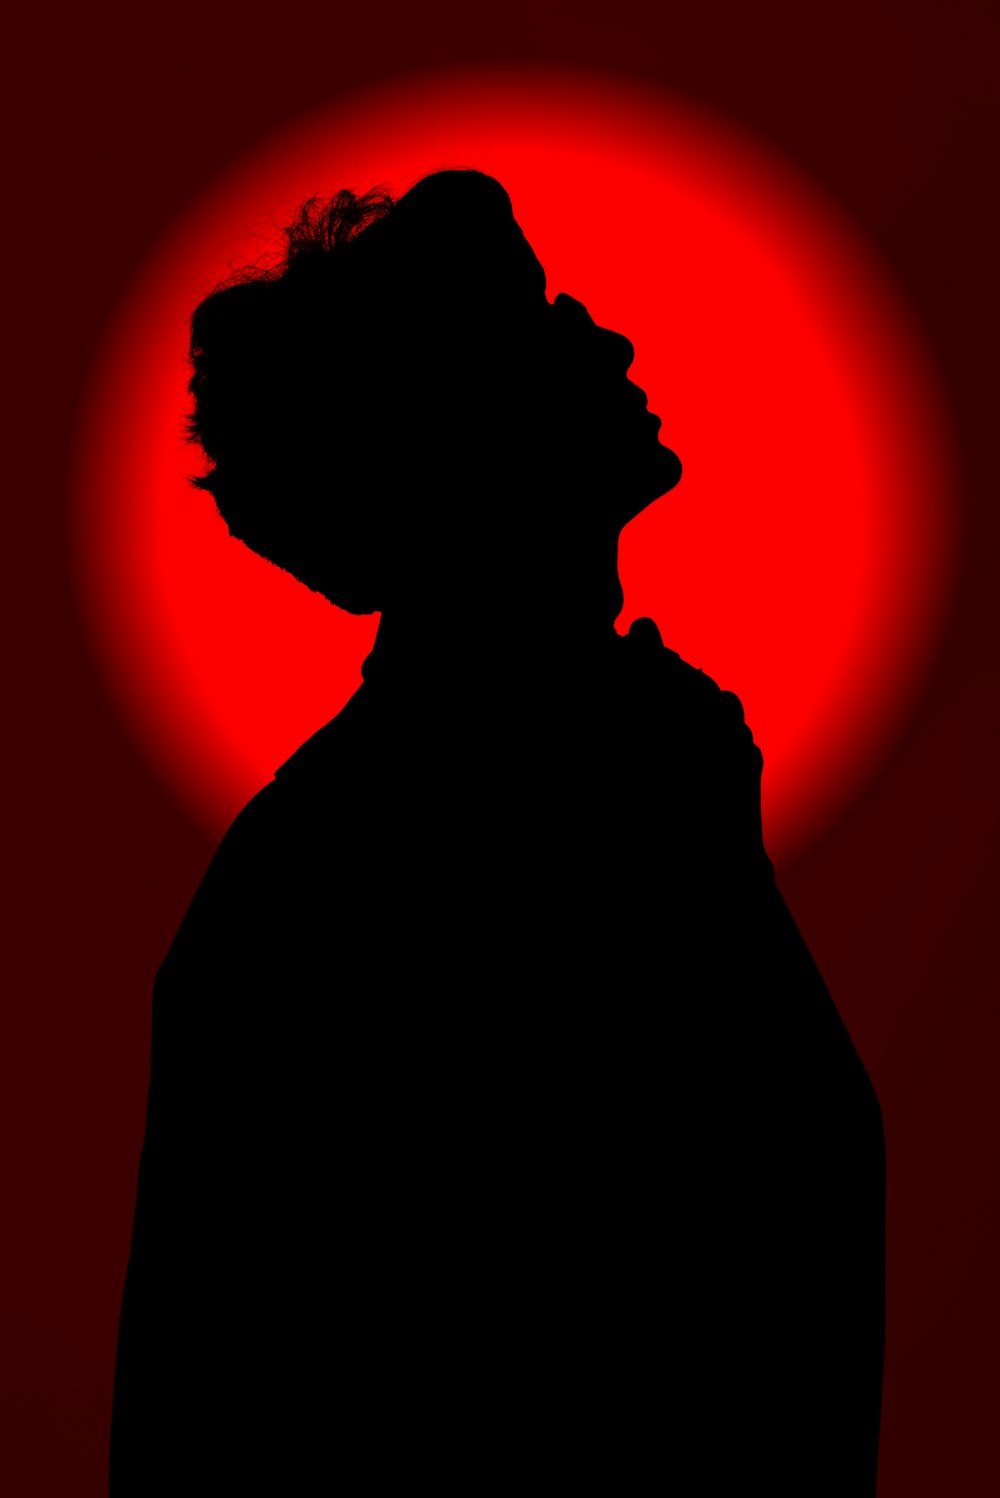 a silhouette of a man in front of a red sun